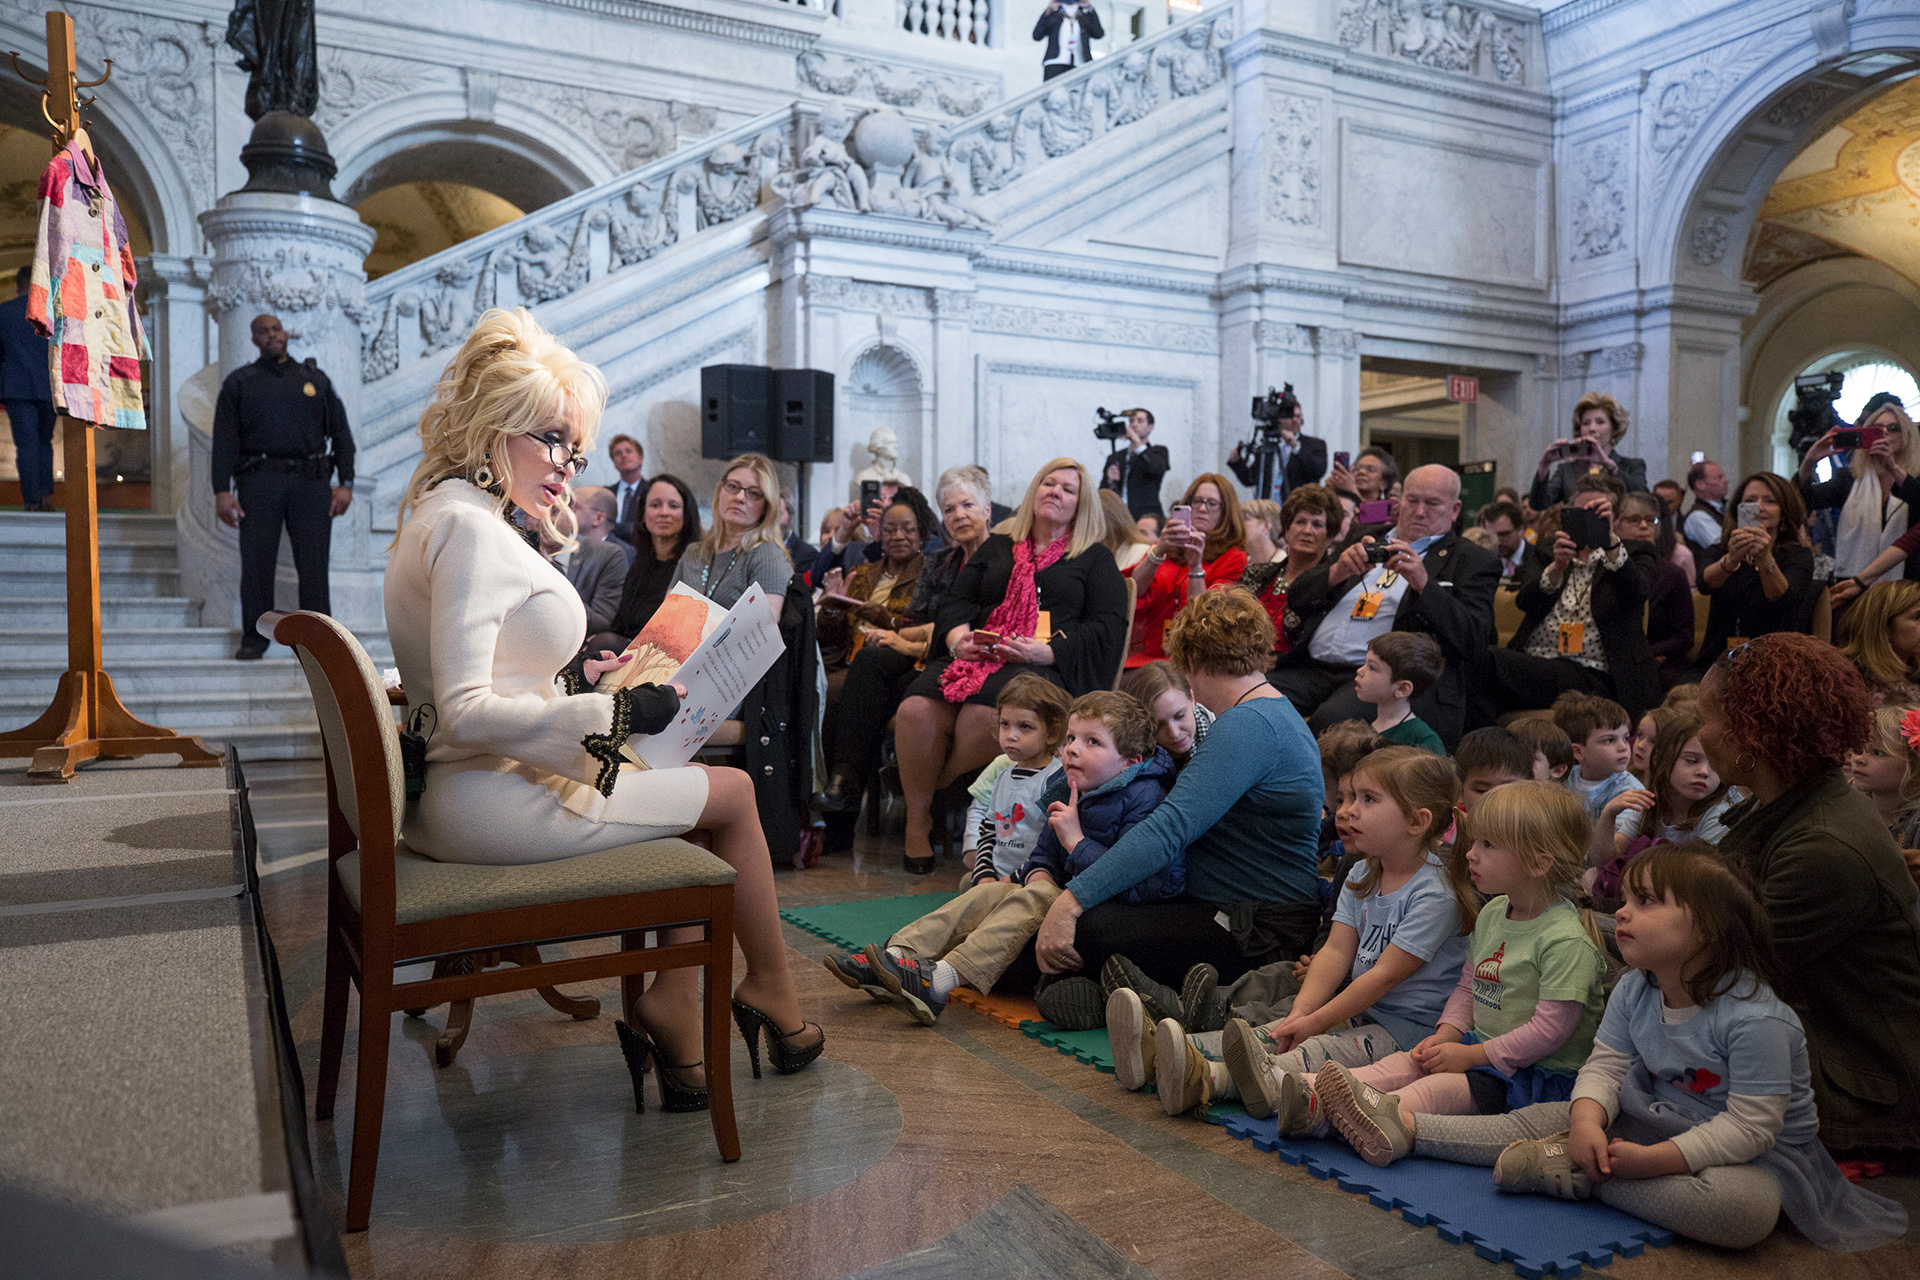 Dolly reads to children at the Library of Congress in 2018 to mark the 100 millionth book given to kids through her Imagination Library program (photo courtesy of Dolly Parton)